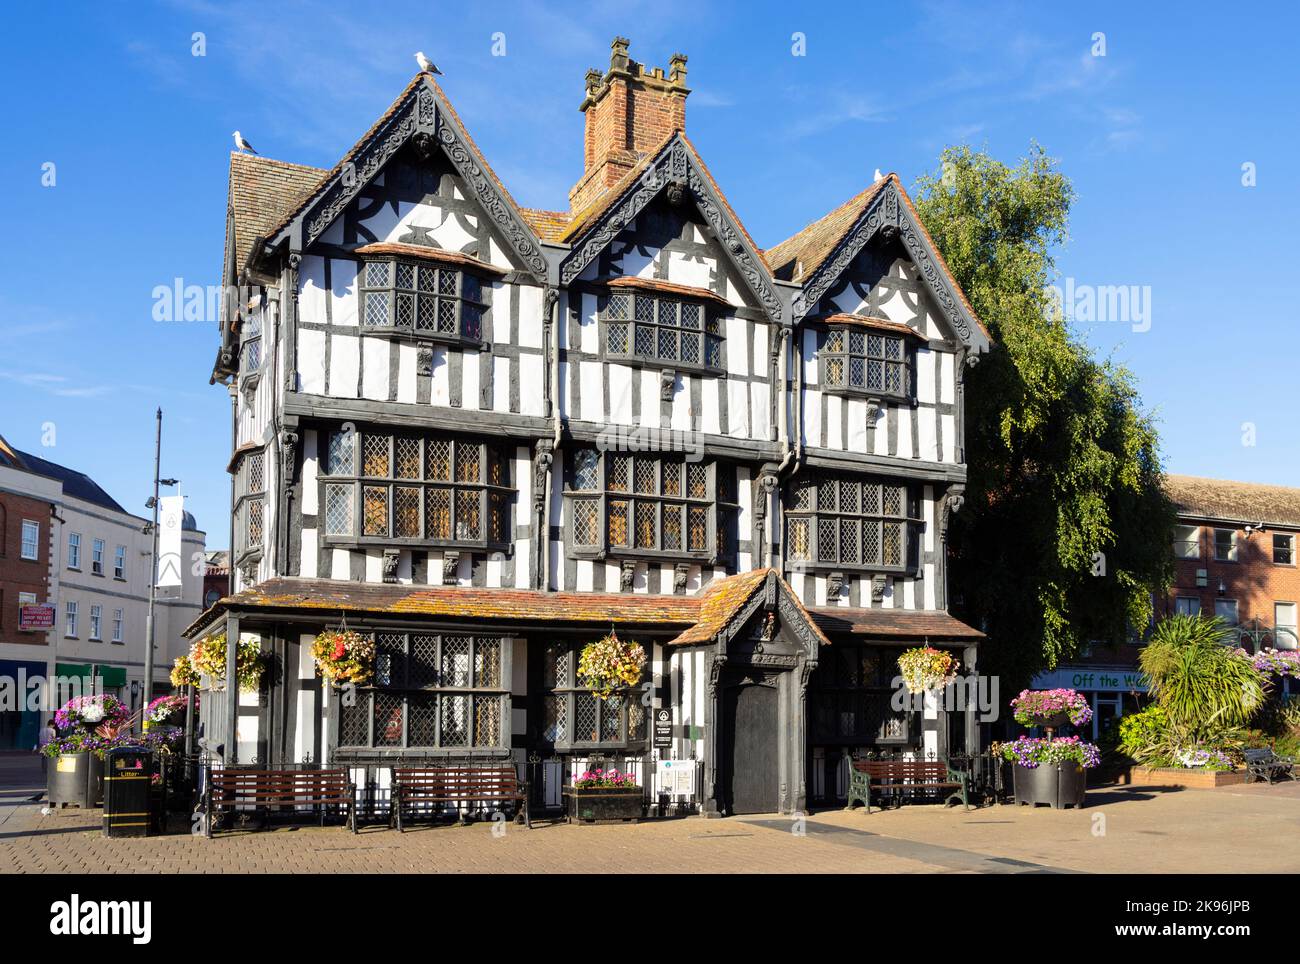 Hereford 17. Century The Old House or Black and White House Museum St. Peter's St High Town Hereford Herefordshire England GB Europa Stockfoto